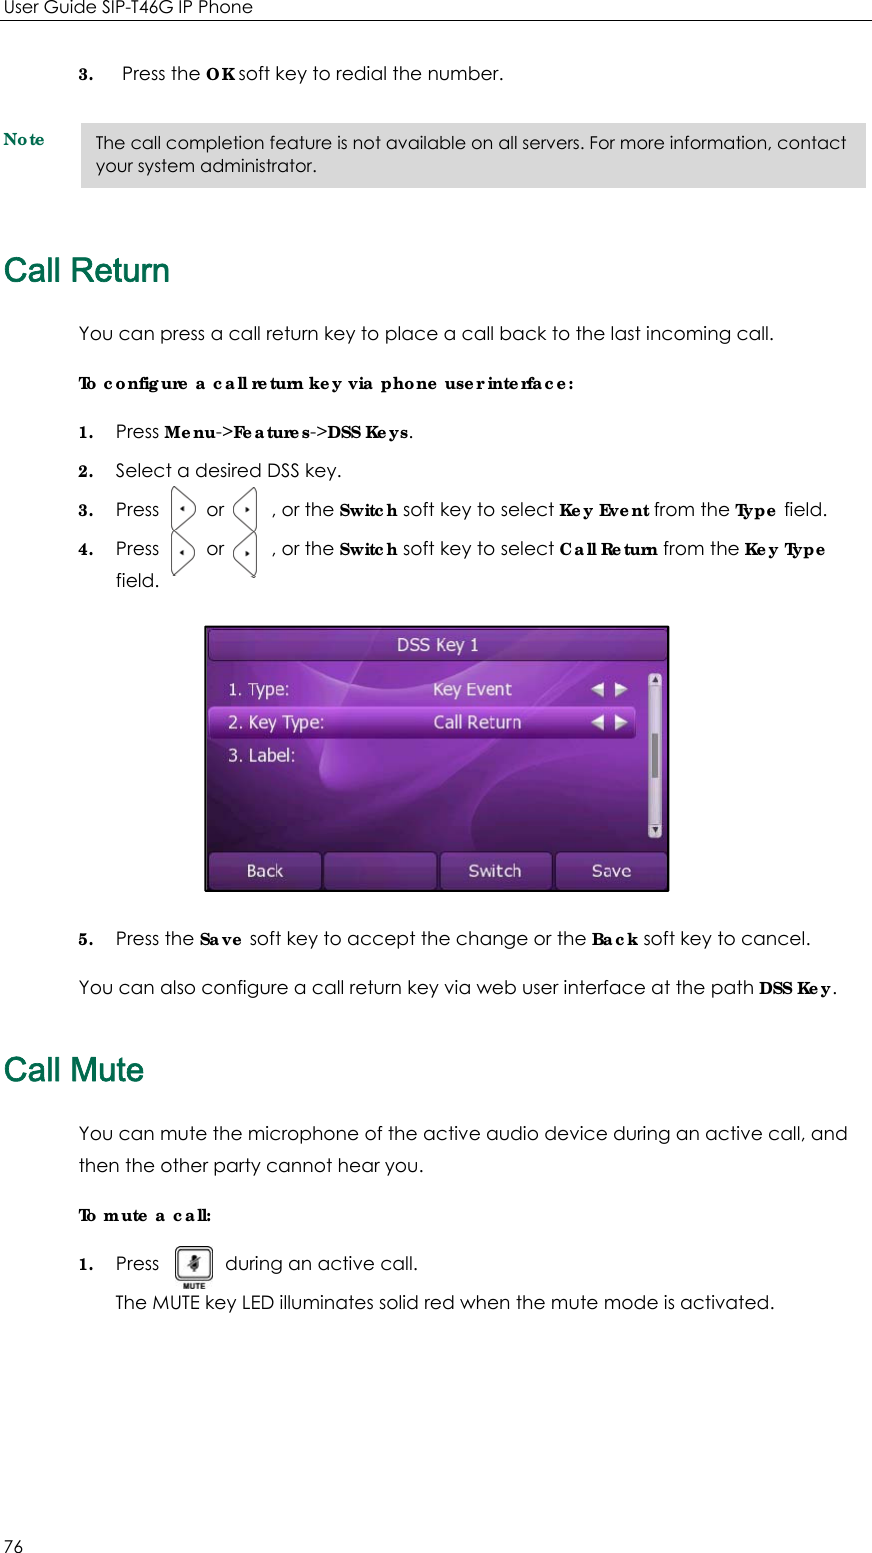 User Guide SIP-T46G IP Phone 76 3. Press the OK soft key to redial the number. Note Call Return You can press a call return key to place a call back to the last incoming call. To configure a call return key via phone user interface: 1. Press Menu-&gt;Features-&gt;DSS Keys. 2. Select a desired DSS key. 3. Press     or     , or the Switch soft key to select Key Event from the Type field. 4. Press     or     , or the Switch soft key to select Call Return from the Key Type field.  5. Press the Save soft key to accept the change or the Back soft key to cancel. You can also configure a call return key via web user interface at the path DSS Key. Call Mute You can mute the microphone of the active audio device during an active call, and then the other party cannot hear you. To mute a call: 1. Press       during an active call.  The MUTE key LED illuminates solid red when the mute mode is activated.   The call completion feature is not available on all servers. For more information, contact your system administrator. 